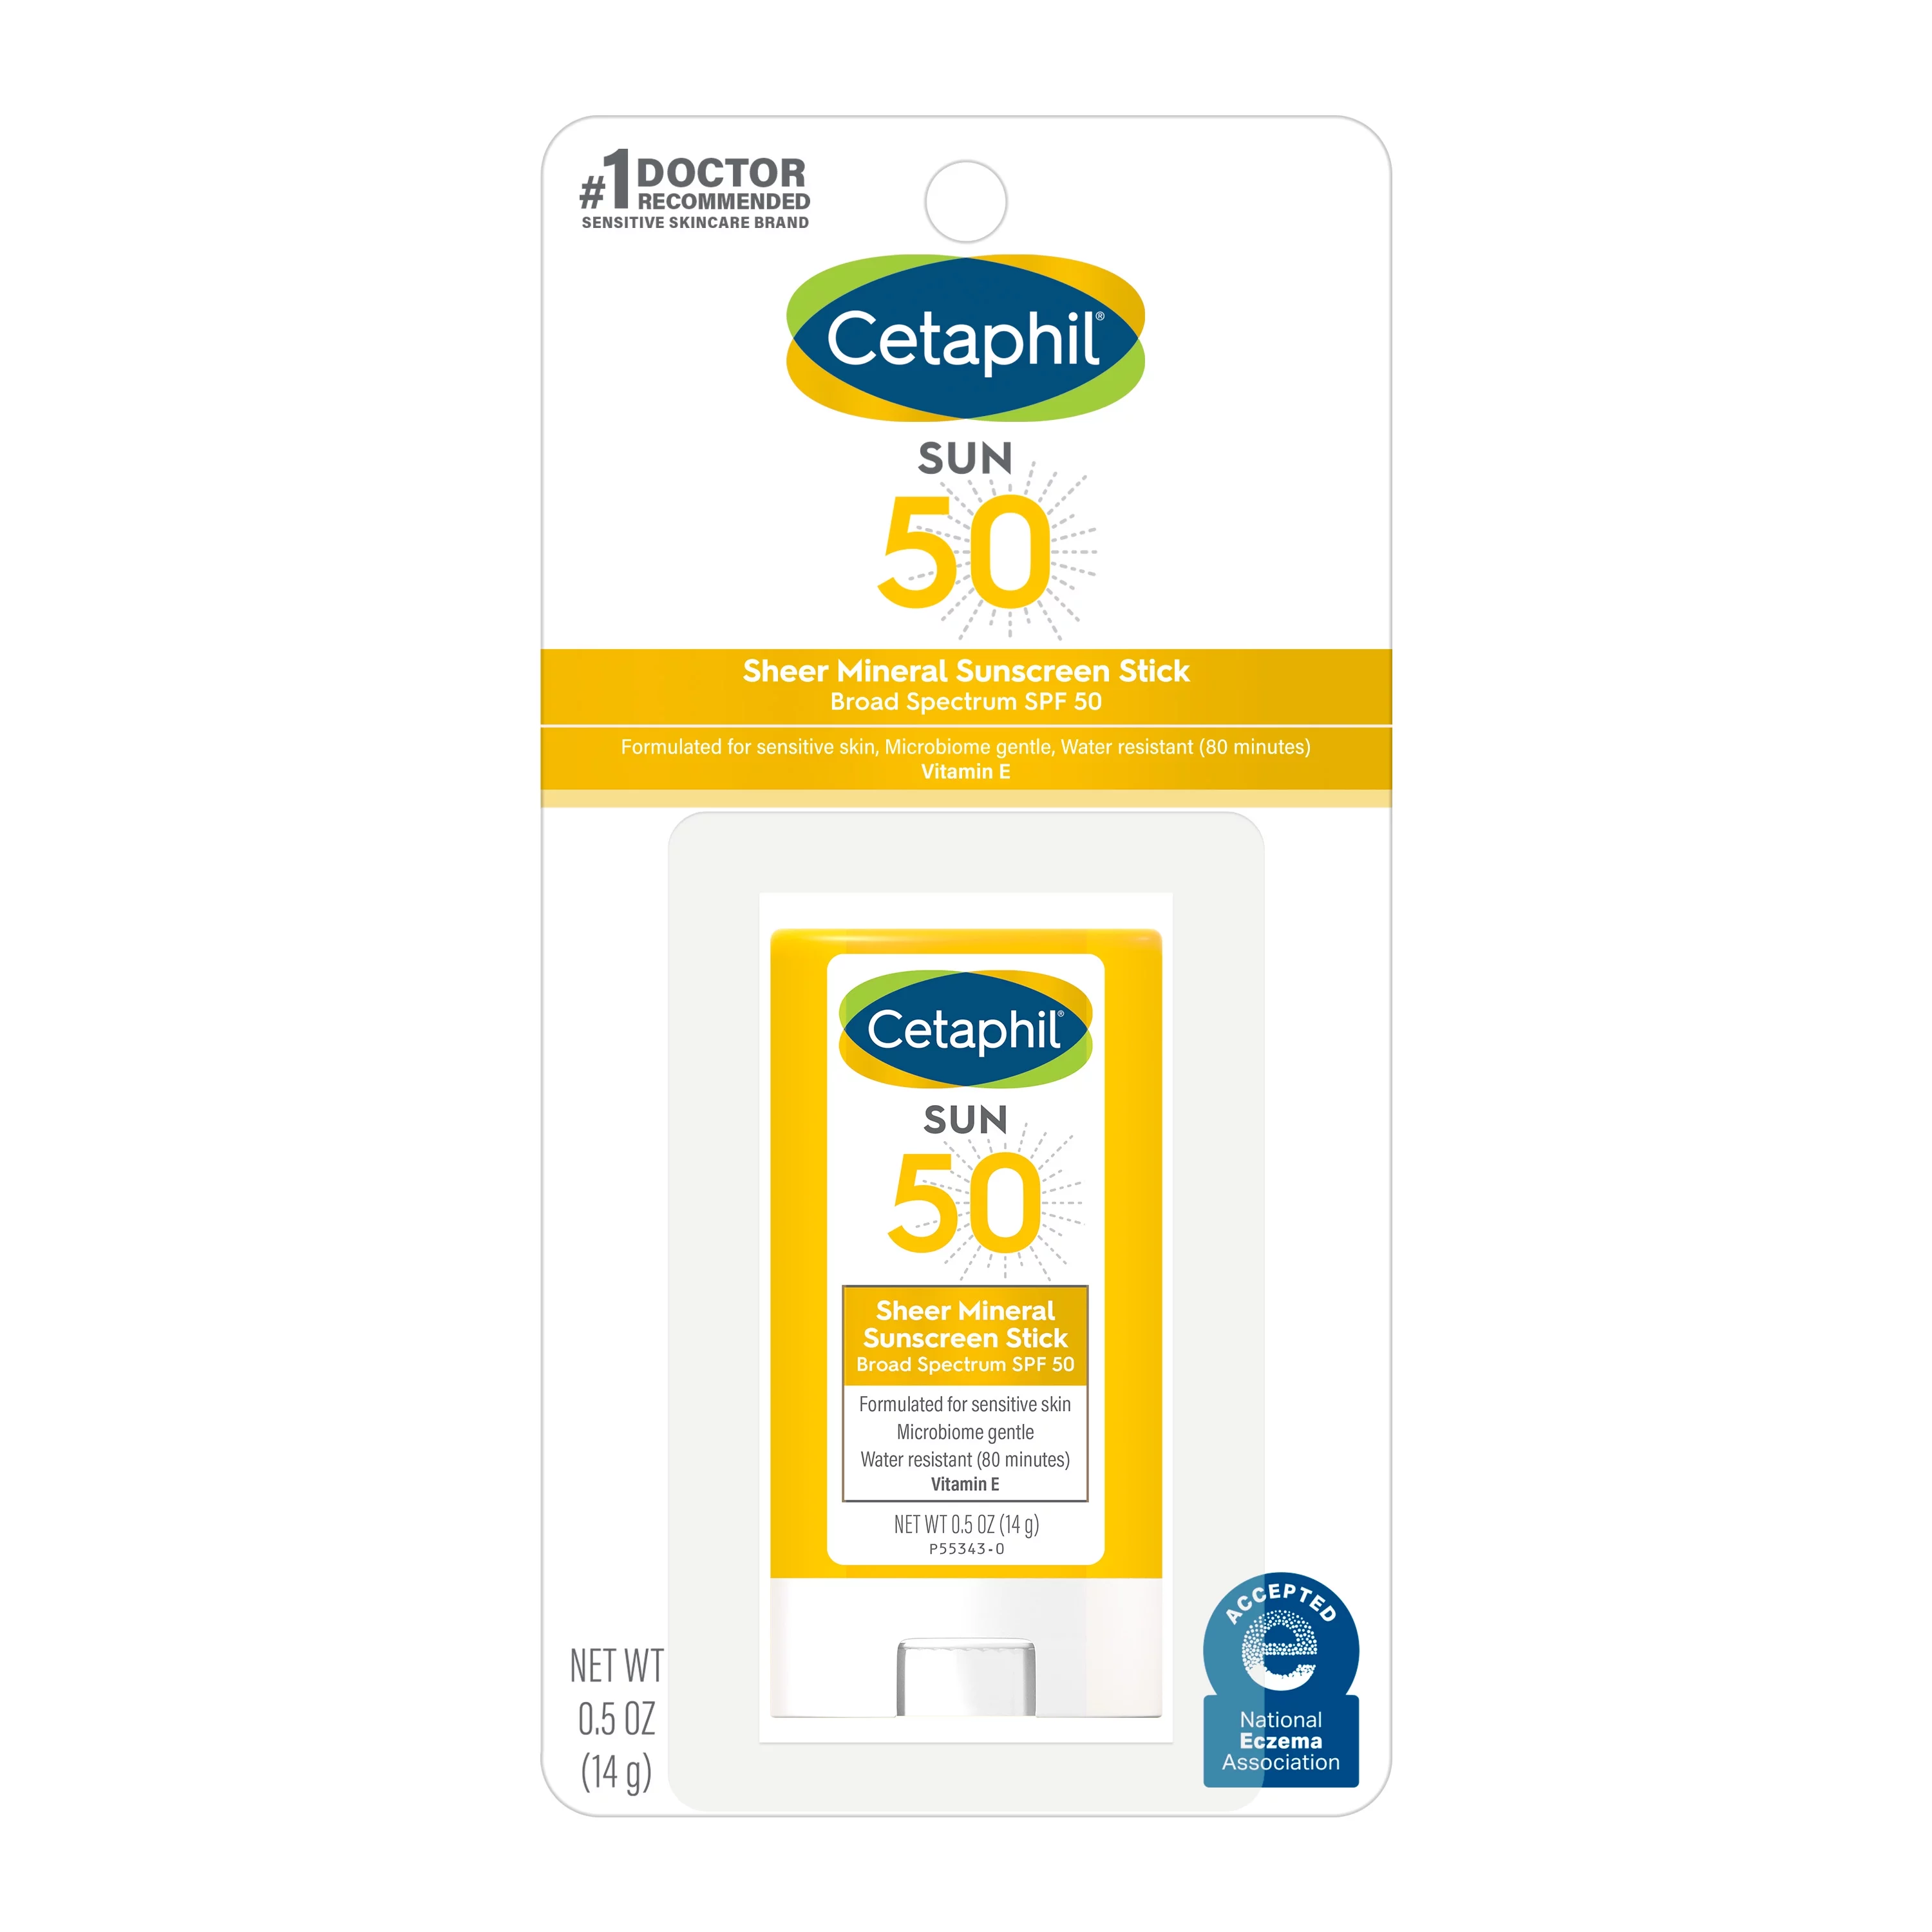 Cetaphil Sheer Mineral Sunscreen Stick for Face & Body SPF 50, 0.5oz